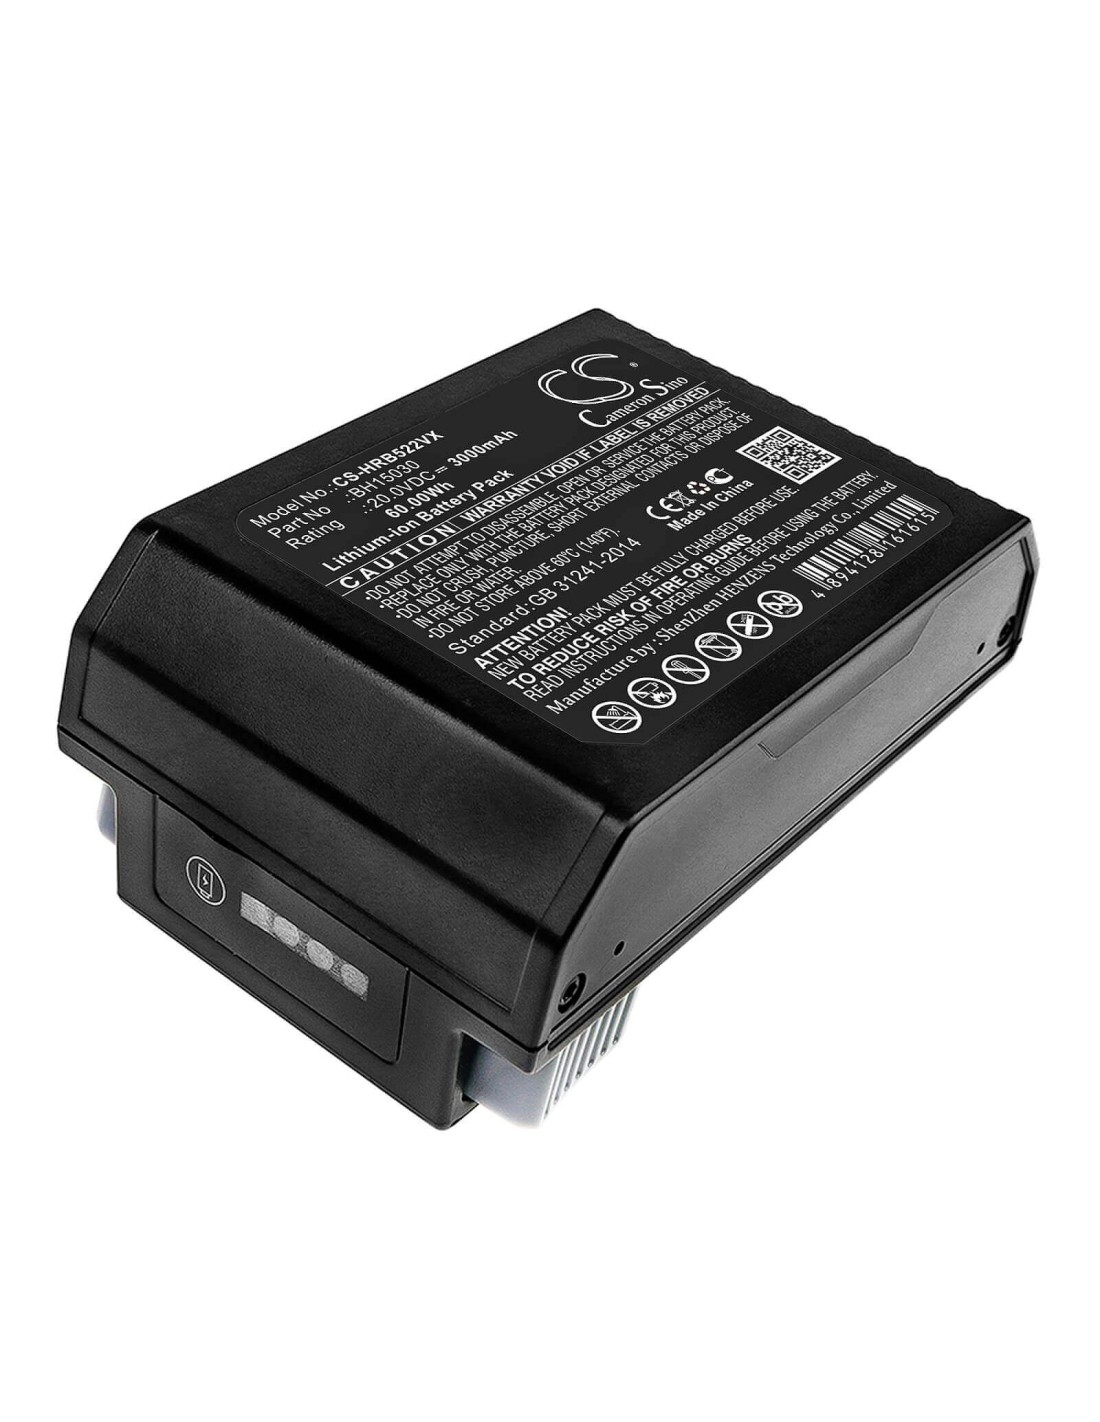 https://www.canadianbatteries.com/279539-thickbox_default/battery-for-hoover-bh25040-replaces-powerone-20v-3000mah-6000wh.jpg